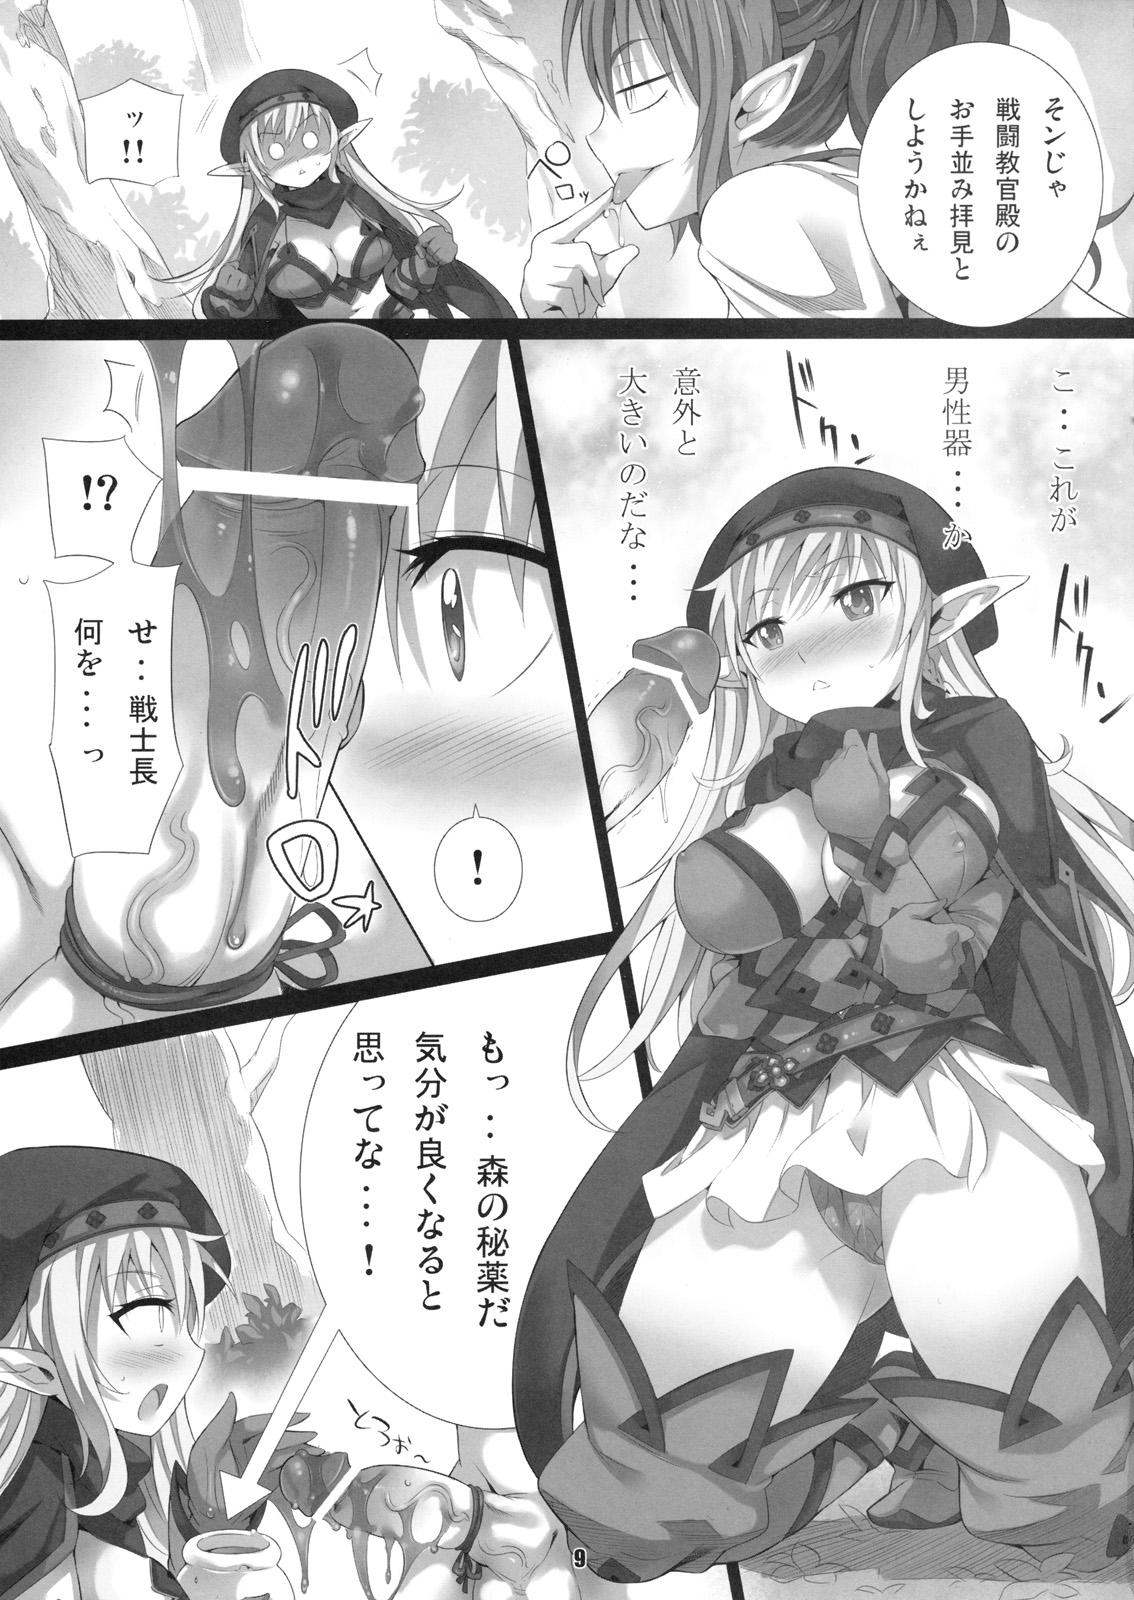 First elves shaker - Queens blade Assfucked - Page 8